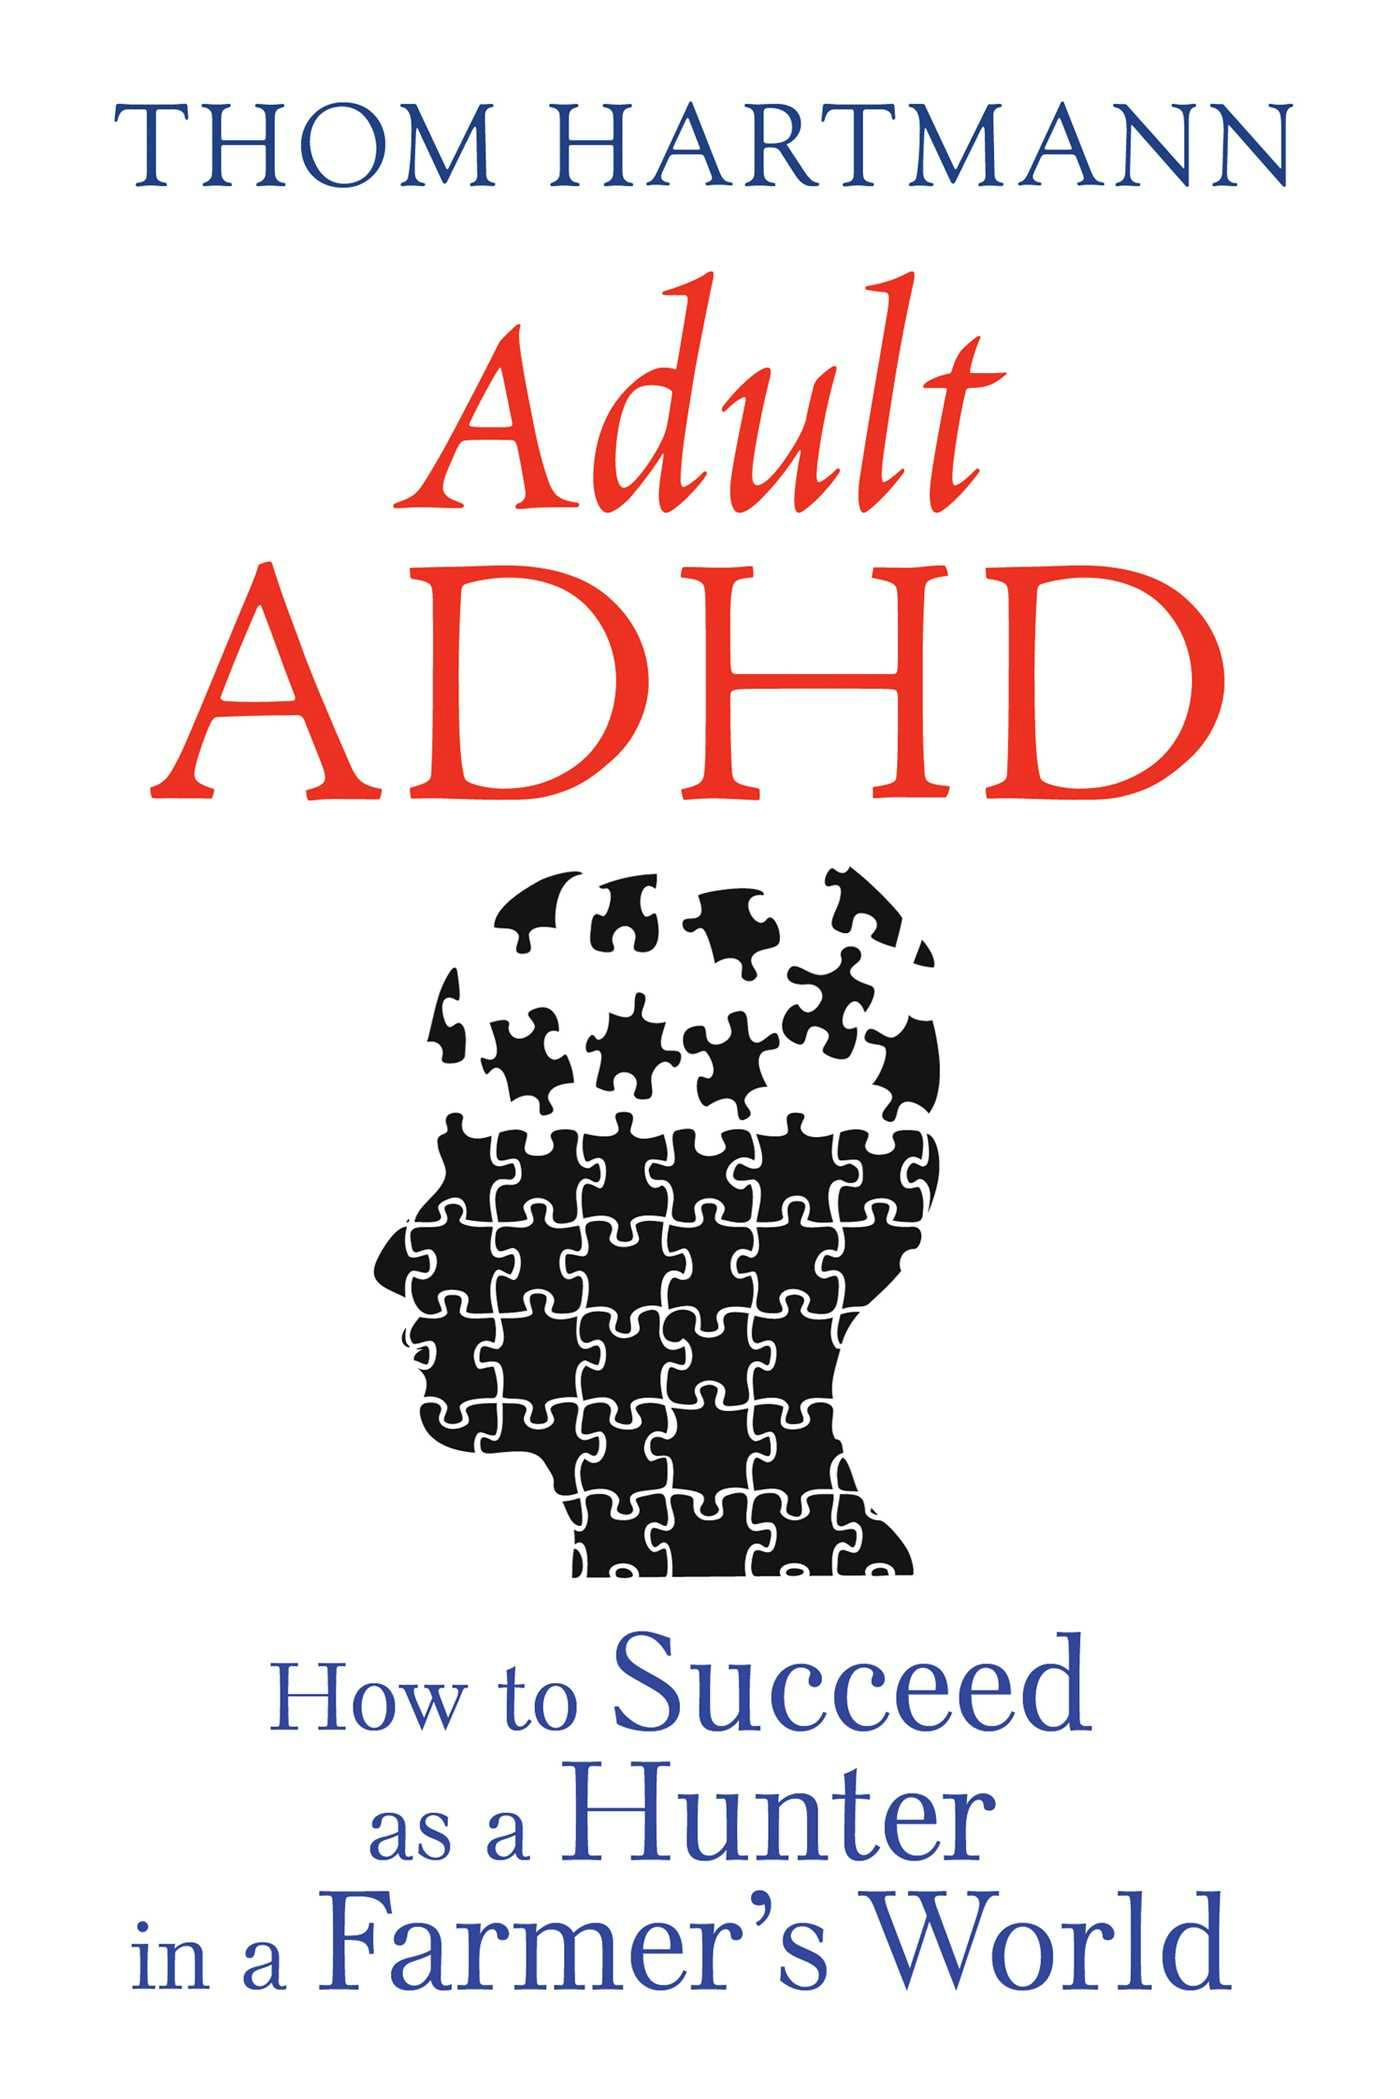 Adult ADHD: How to Succeed as a Hunter in a Farmer's World - Thom Hartmann